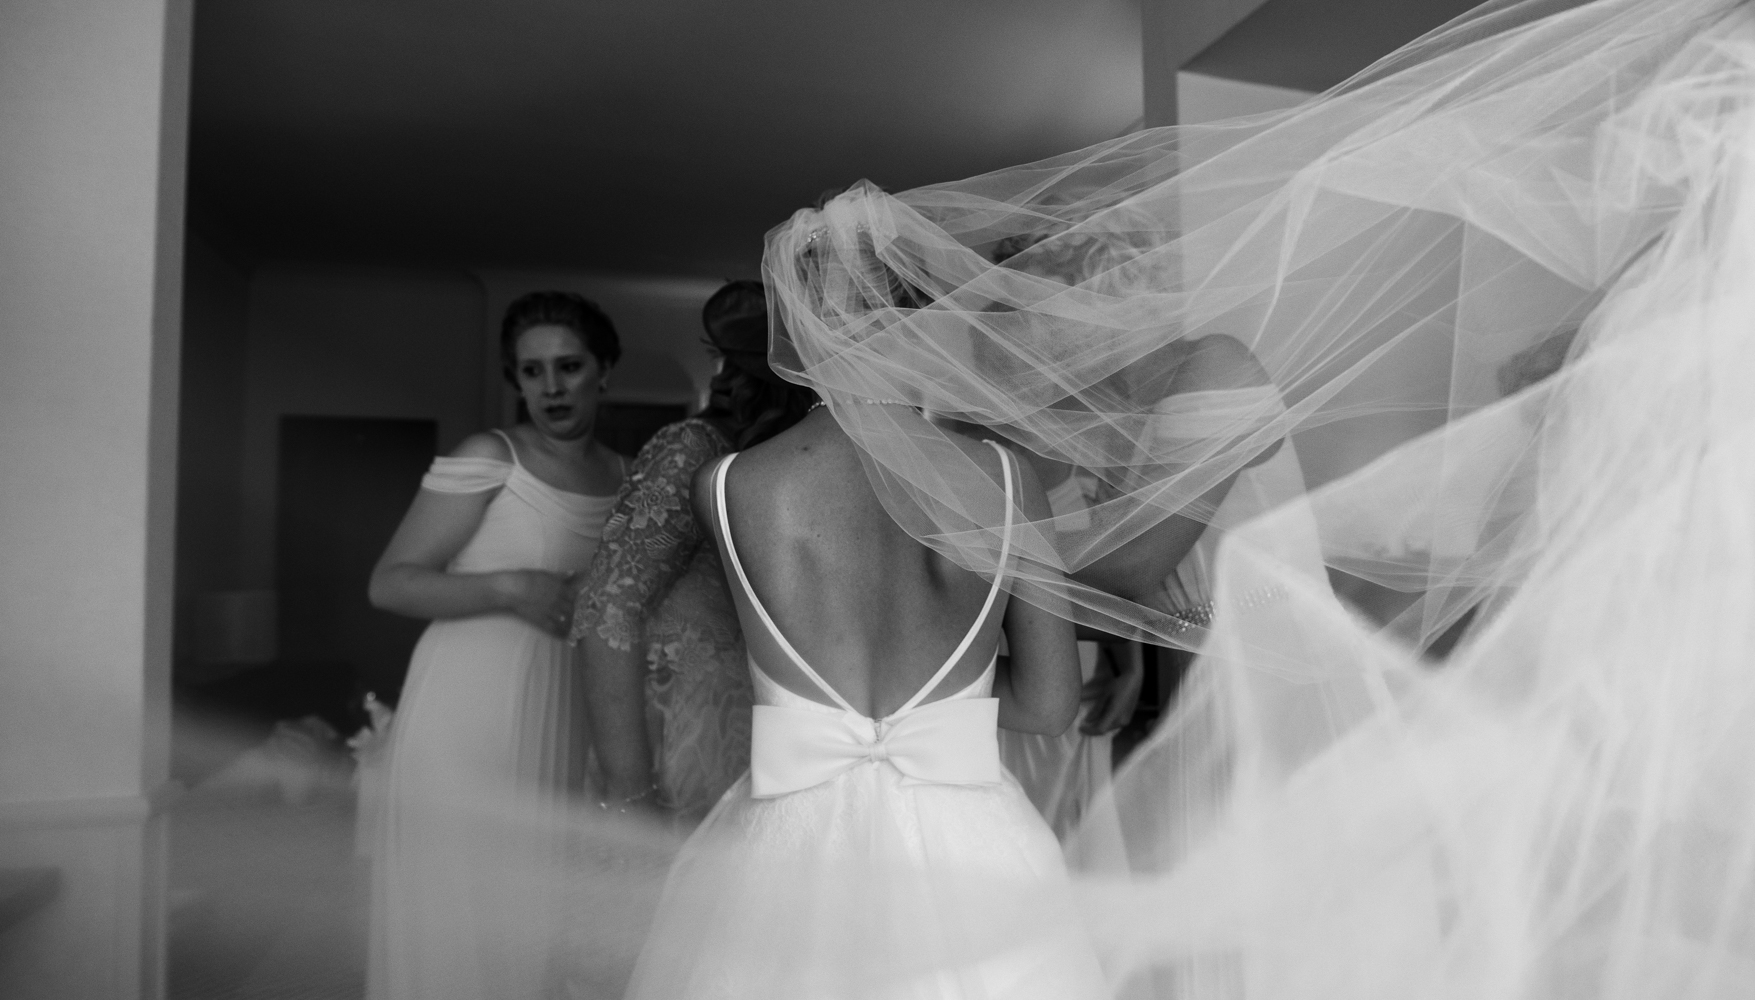 A black and white photo of the back of the brides dress with the veil flowing behind her